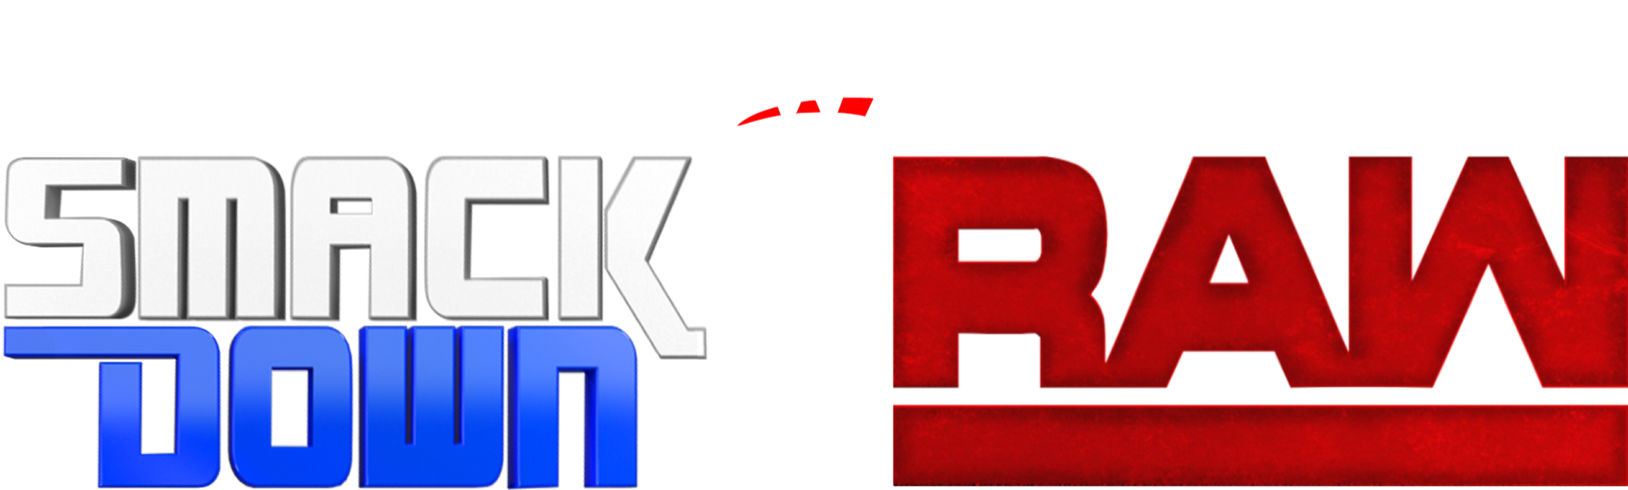 Download New Raw Logo Png Wwe Smackdown Vs Raw Logo Png Image With No Background Pngkey Com